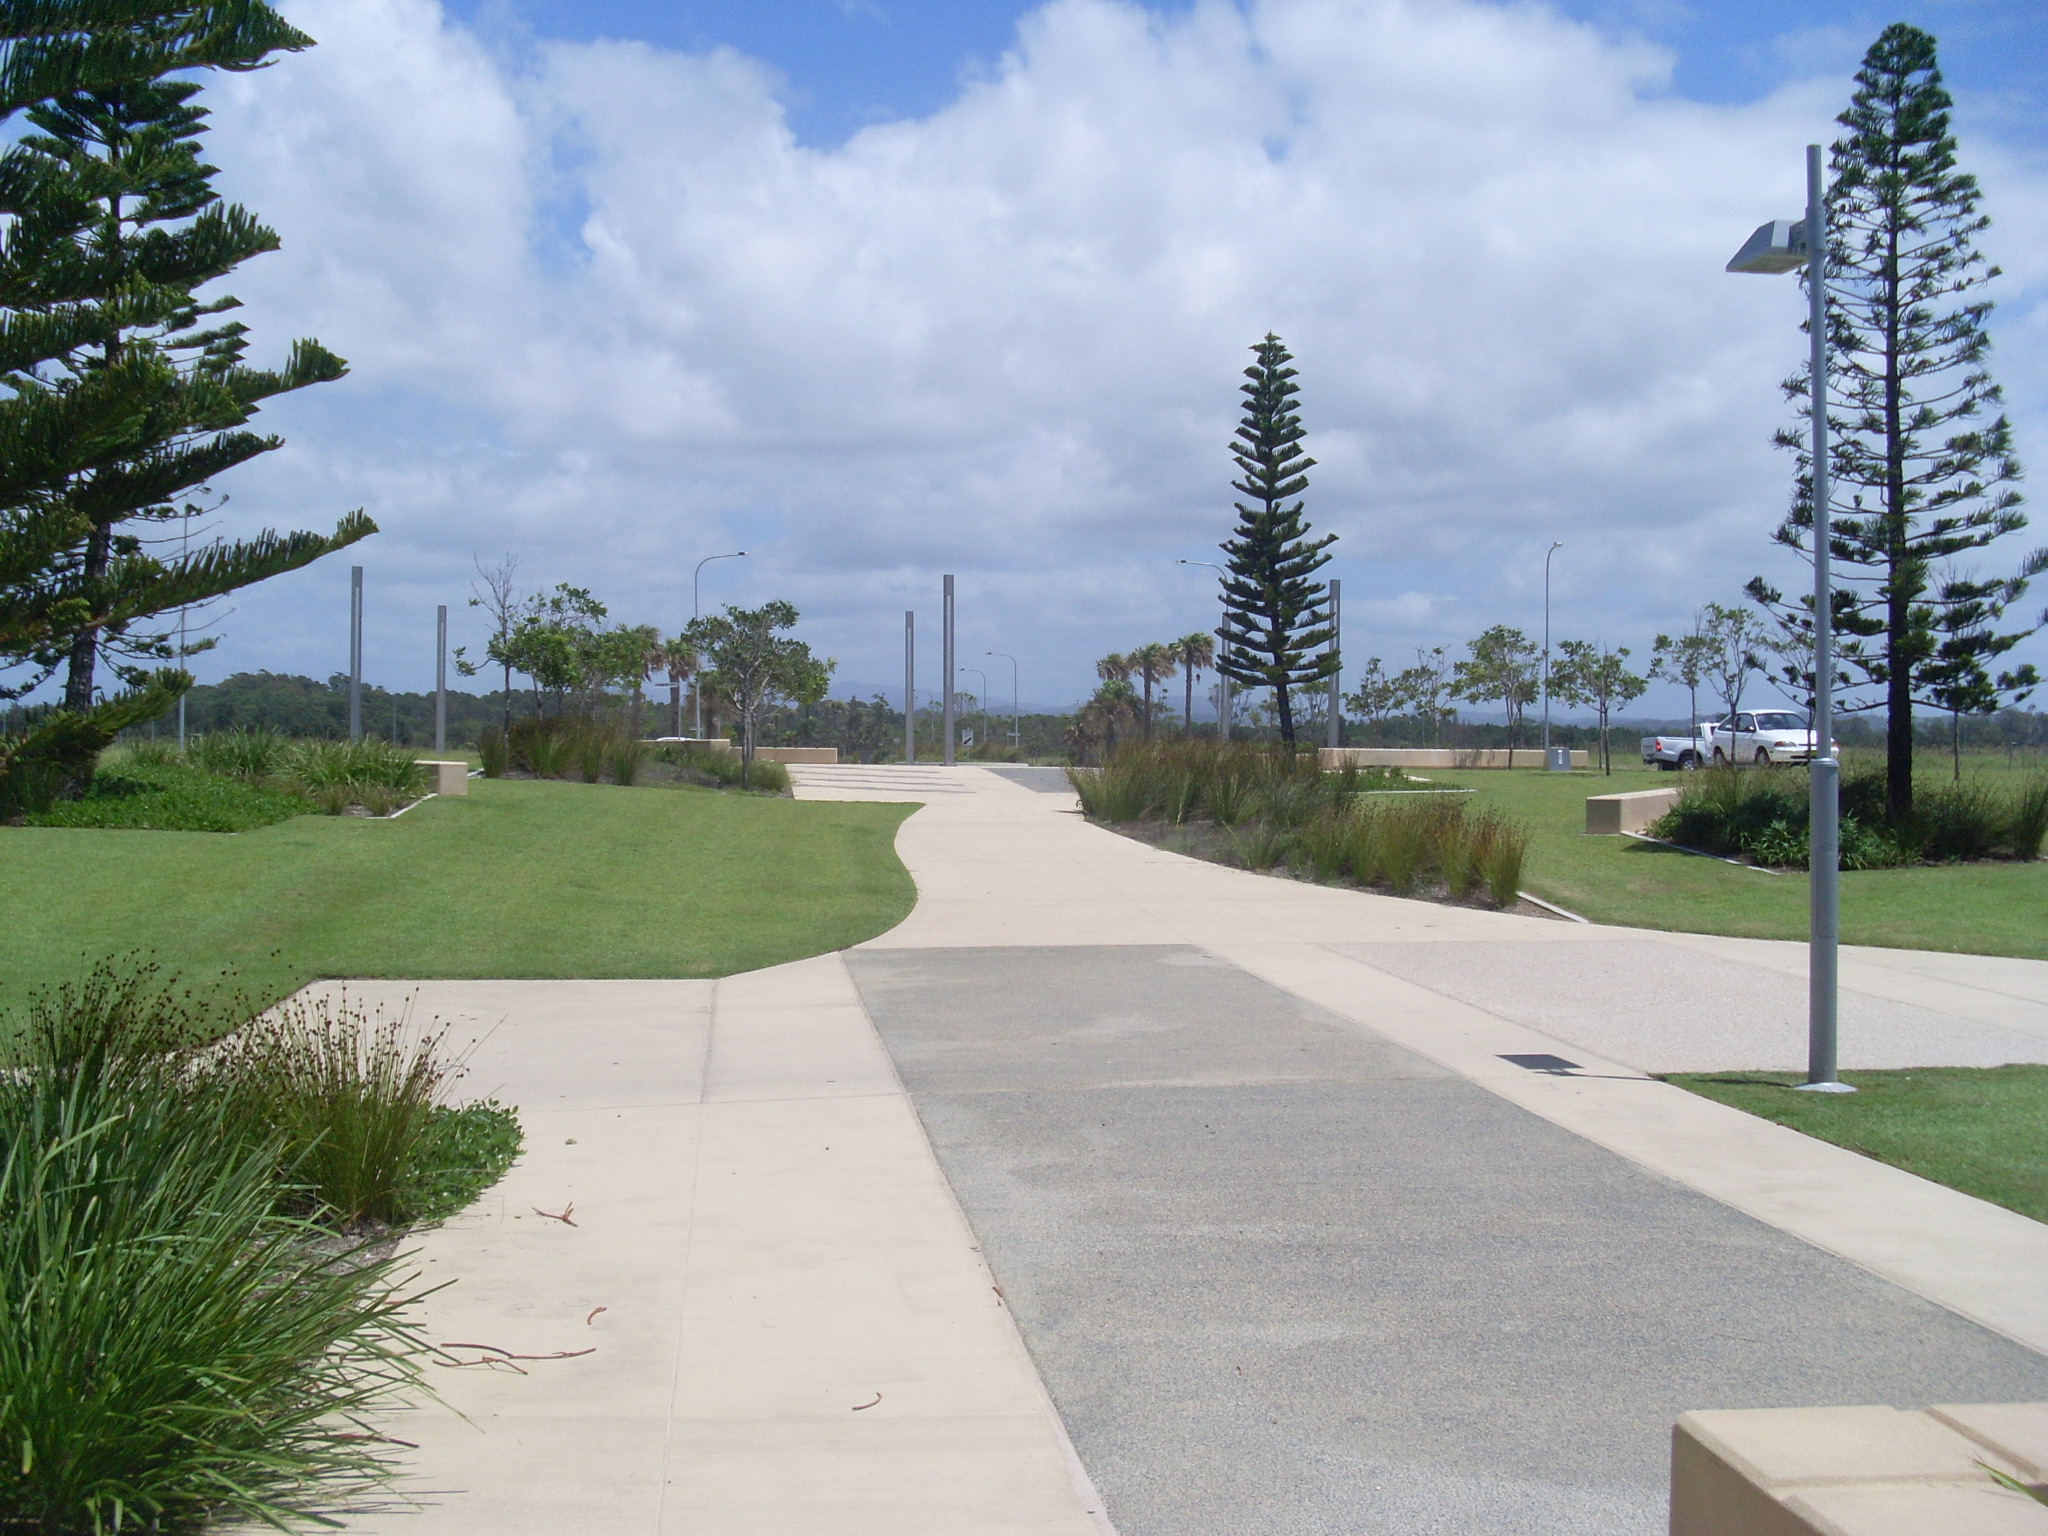 The completed project is a beachside community with around 200 residential blocks 